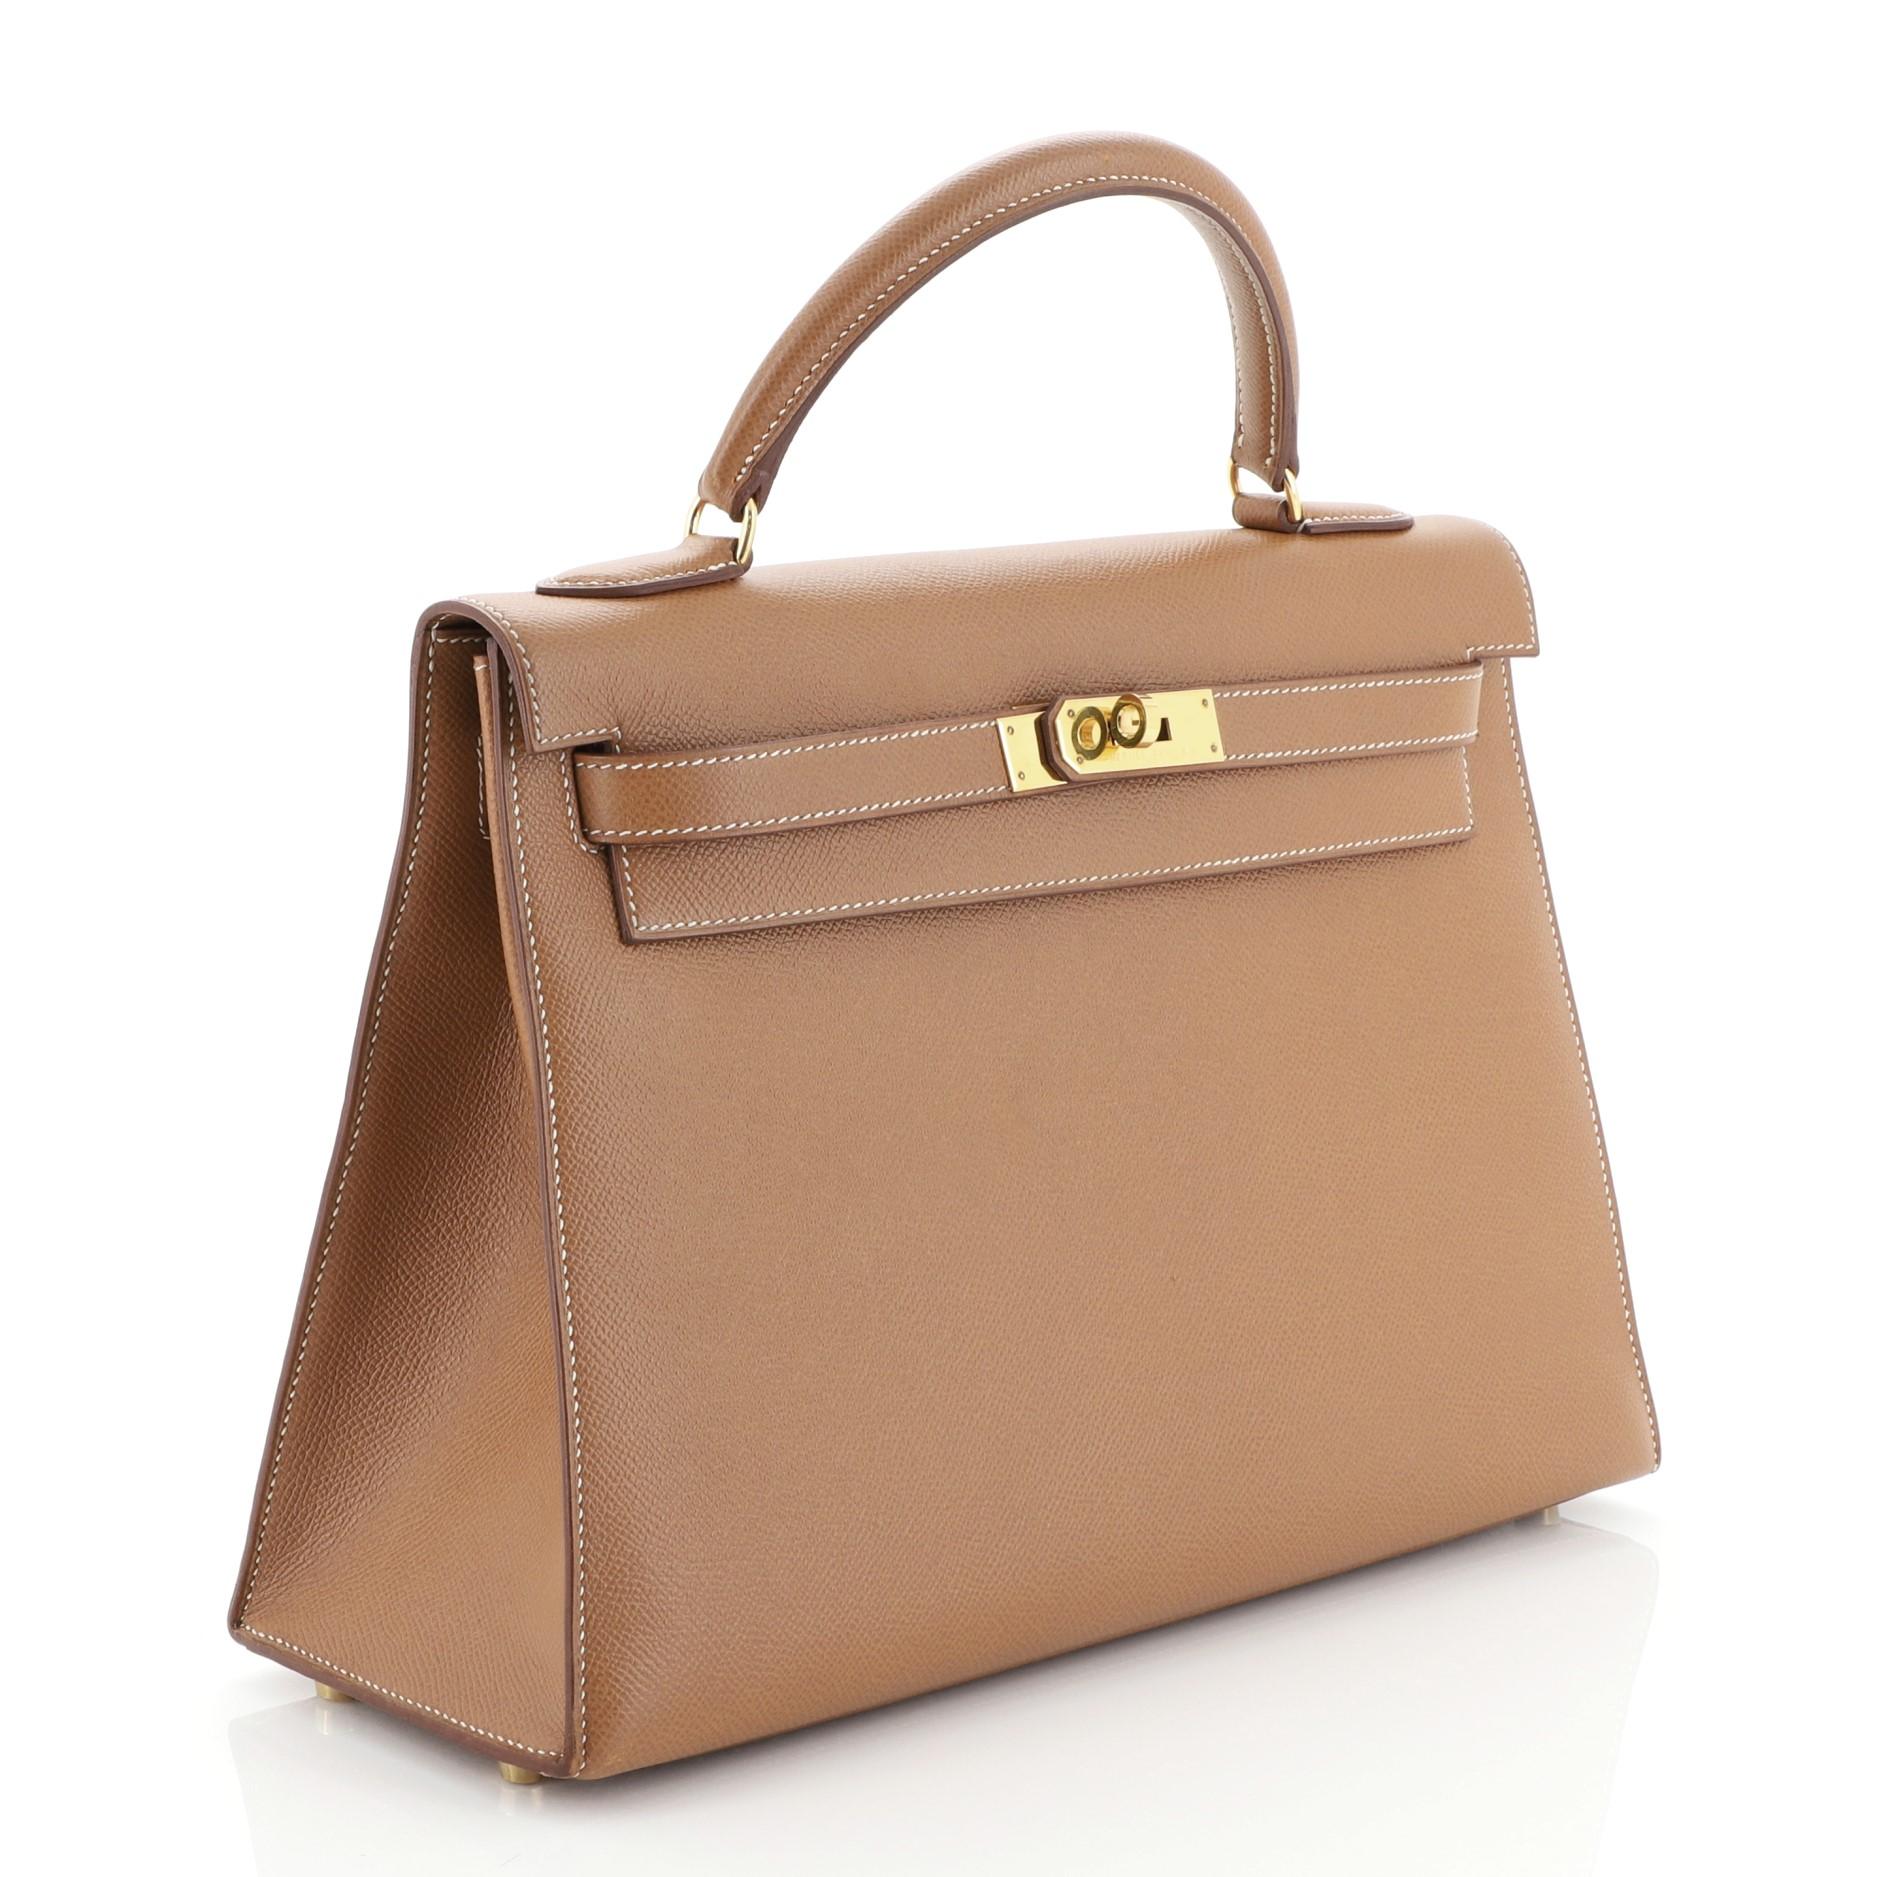 This Hermes Kelly Handbag Gold Courchevel with Gold Hardware 32 is truly a classic piece. Known for their expert craftsmanship, each bag takes over 18 hours to produce. Crafted from Gold brown Courchevel leather, this handbag features a single top